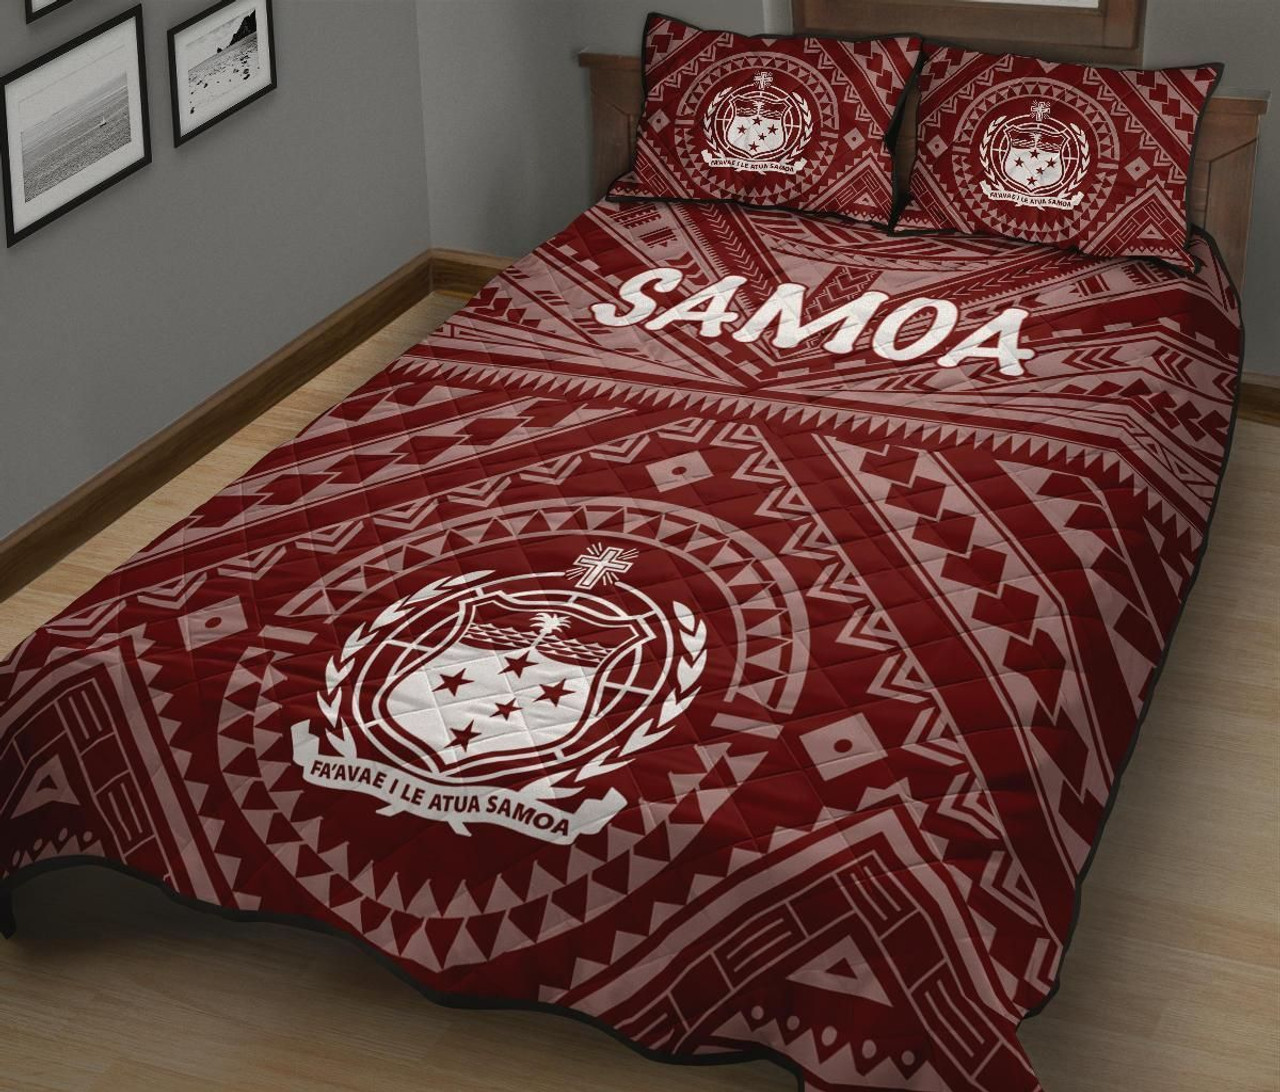 Samoa Quilt Bed Set - Samoa Seal In Polynesian Tattoo Style (Red) 2